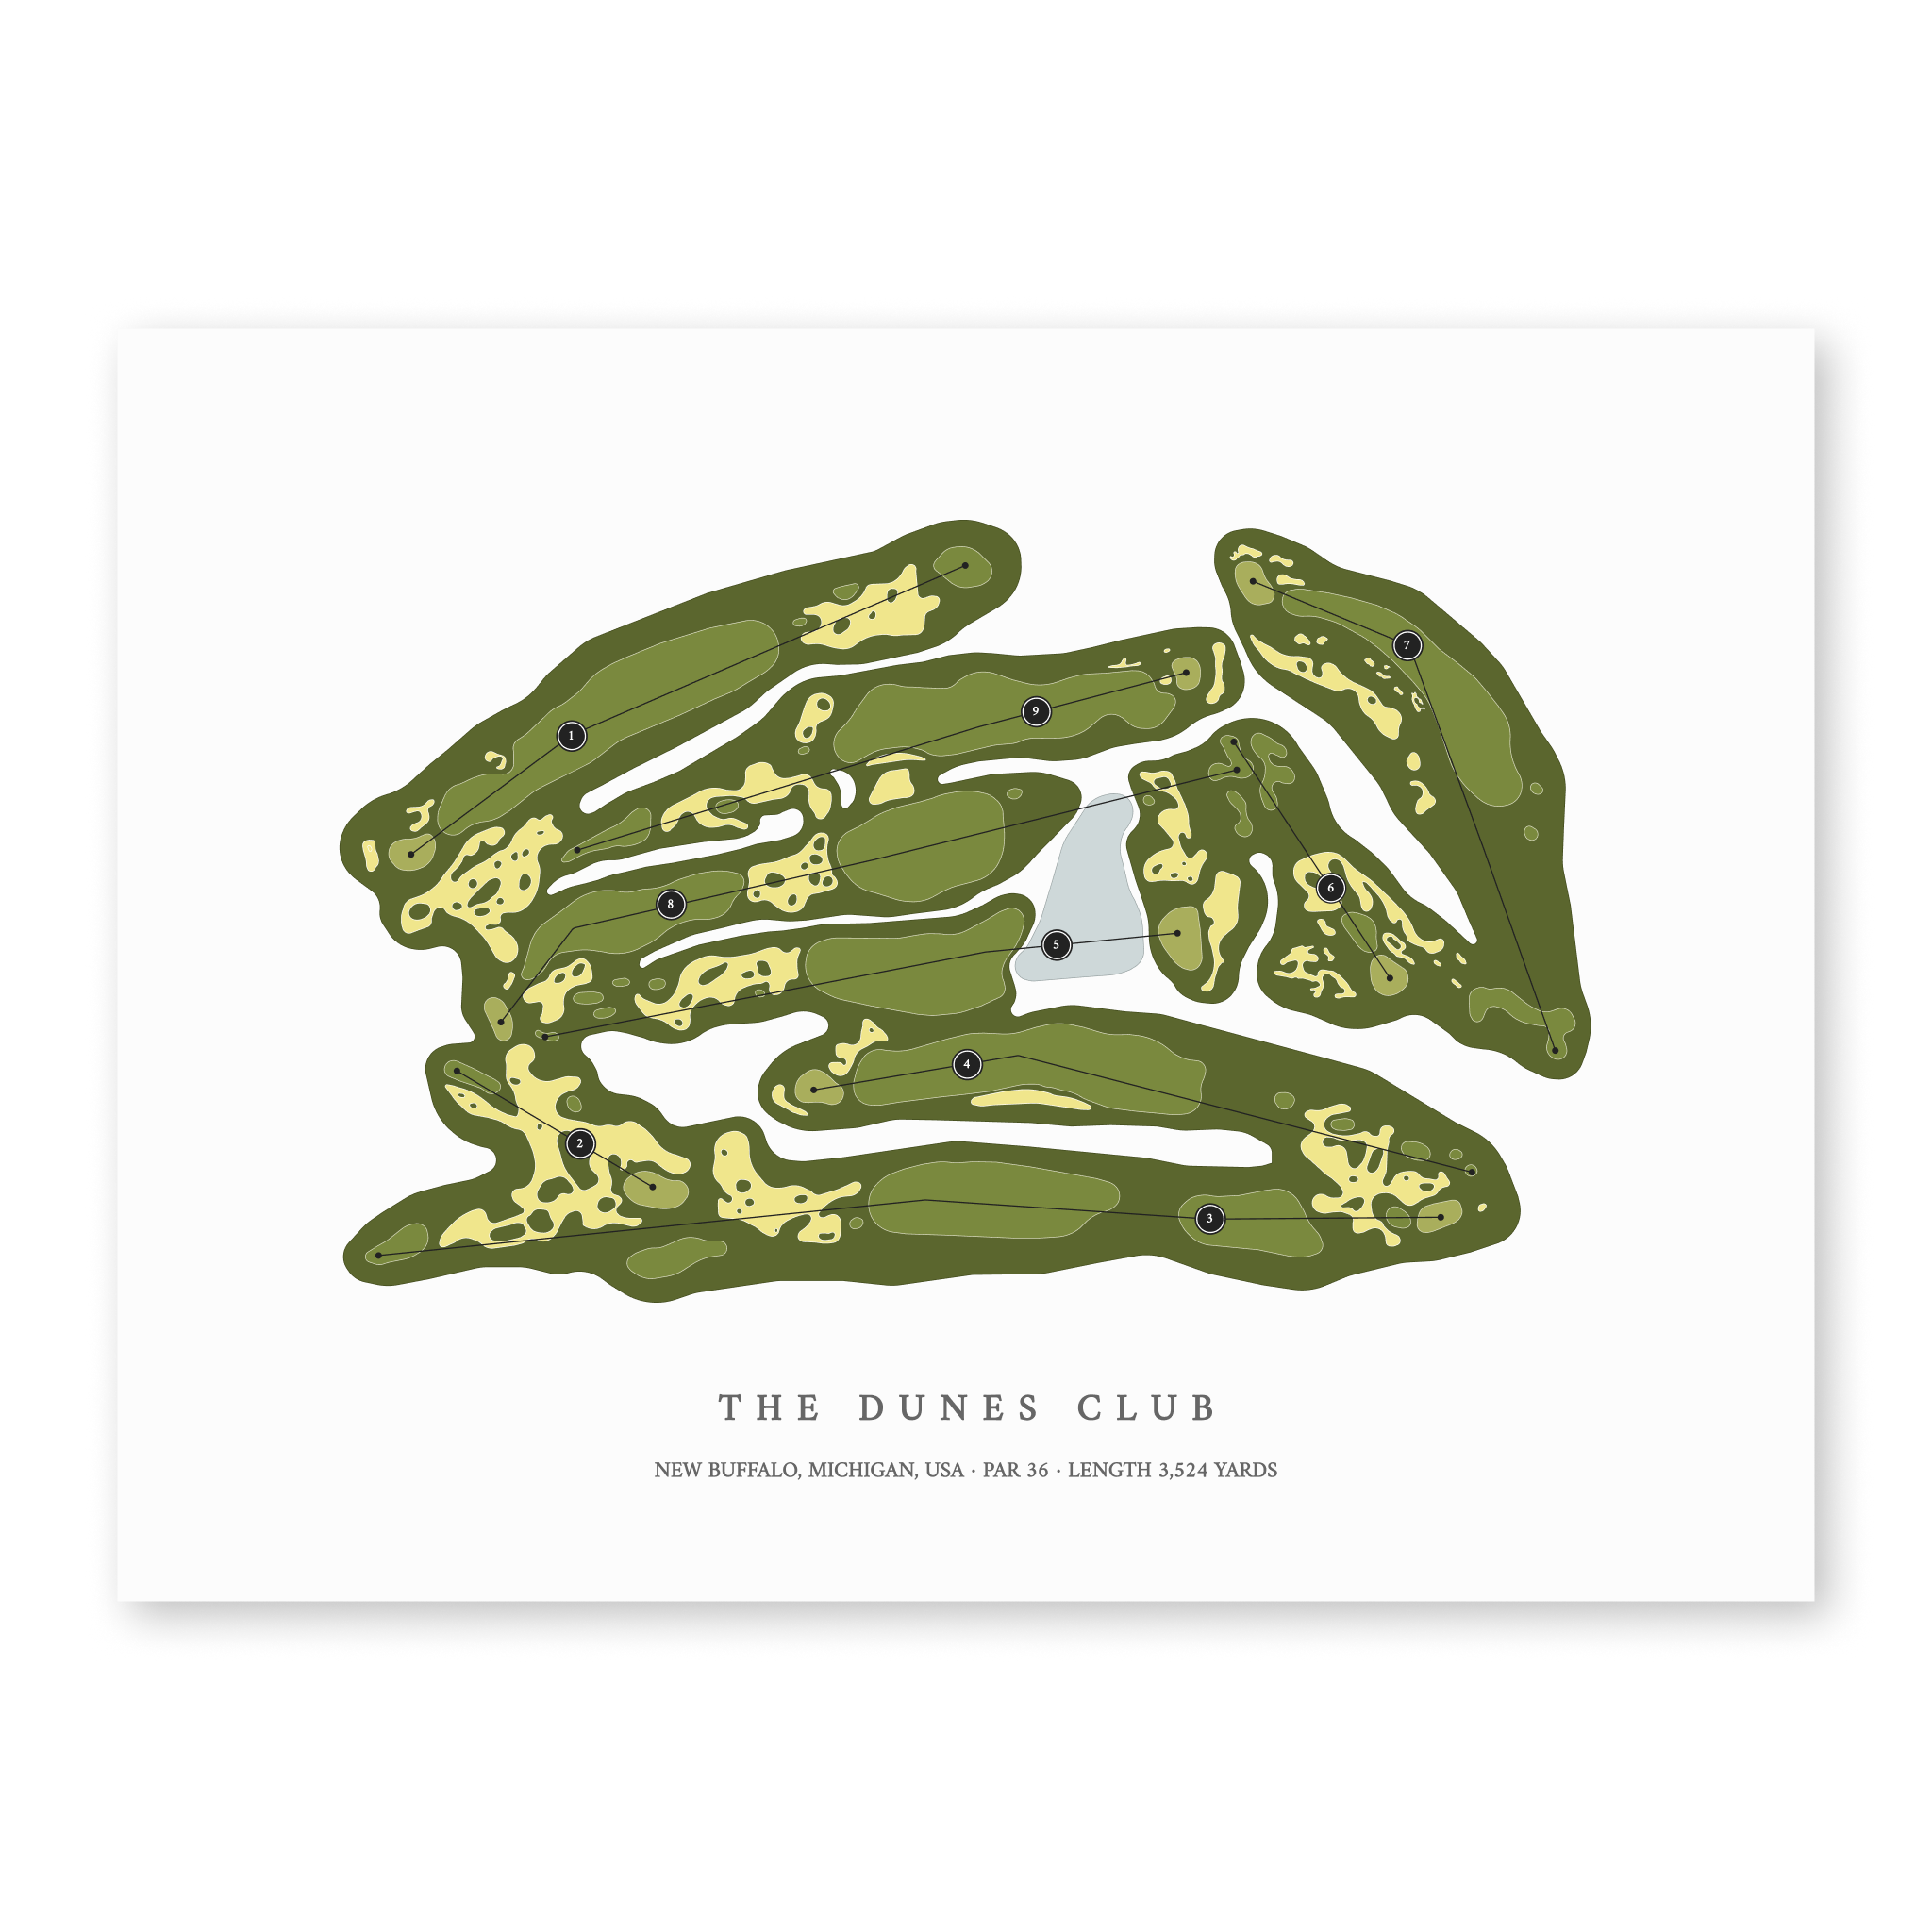 The Dunes Club | Golf Course Map | Unframed With Hole Numbers #hole numbers_yes